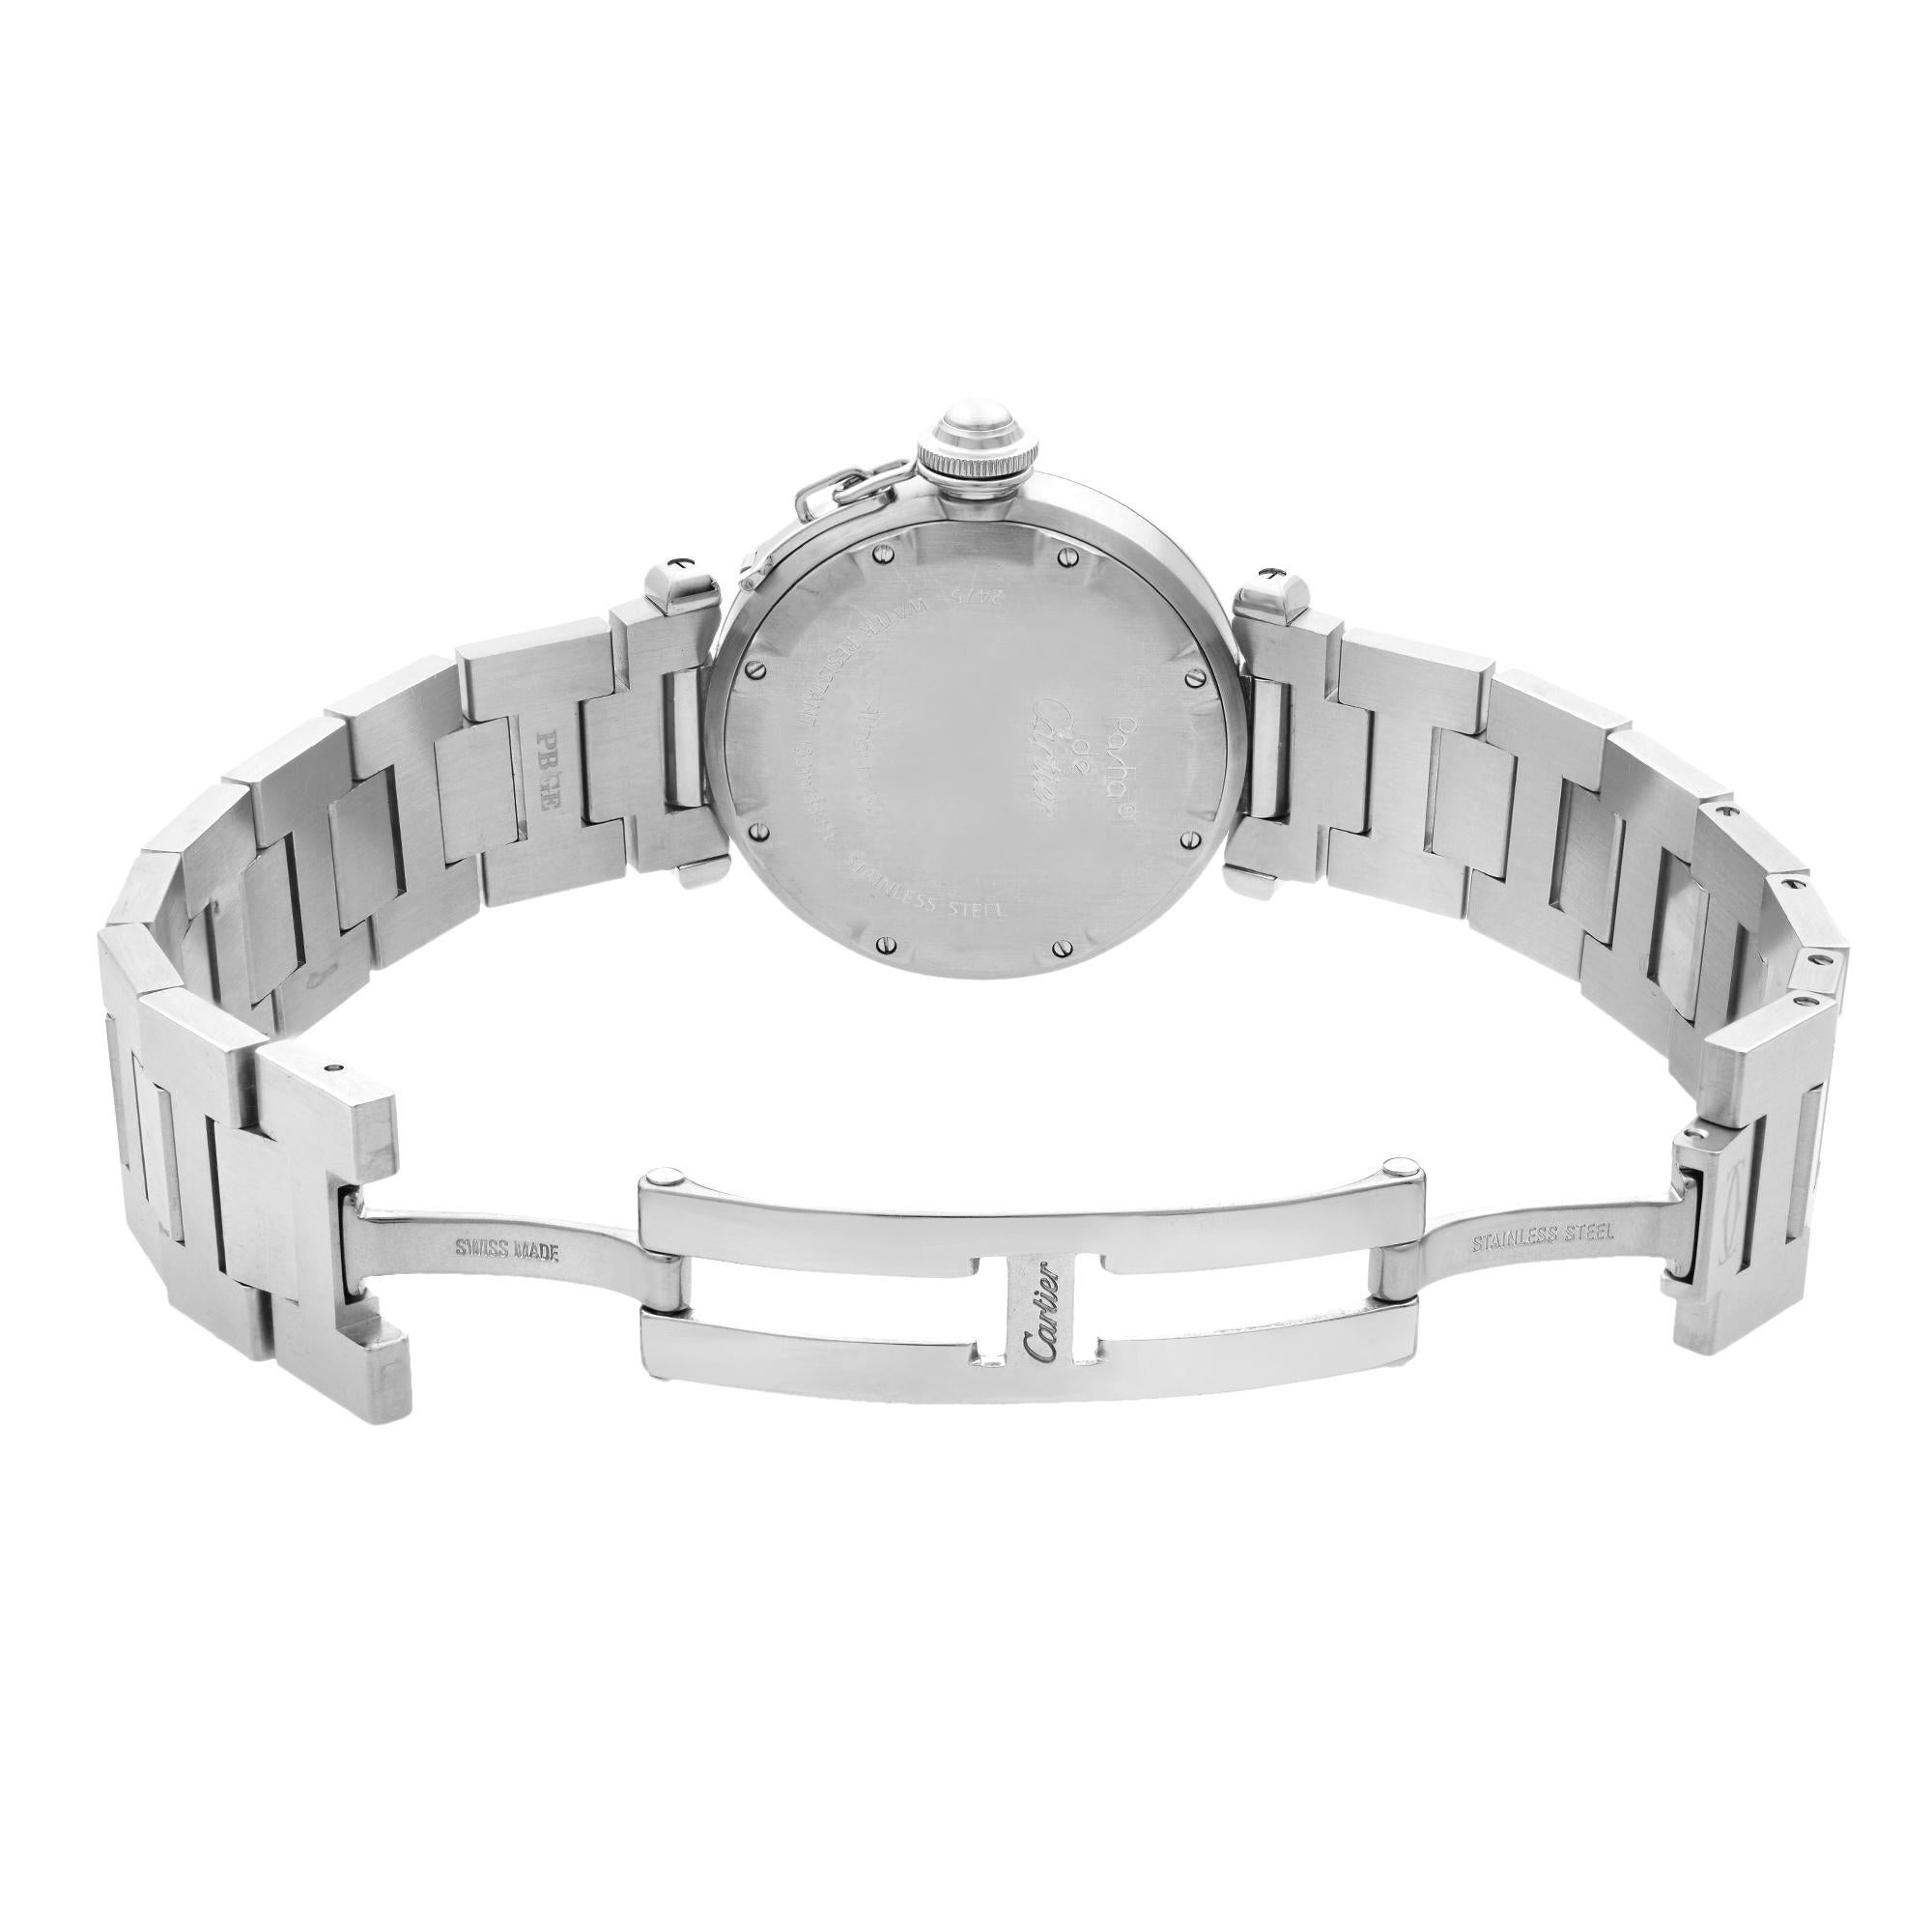 Cartier Pasha Stainless Steel White Dial Automatic Unisex Watch W31044M7 2